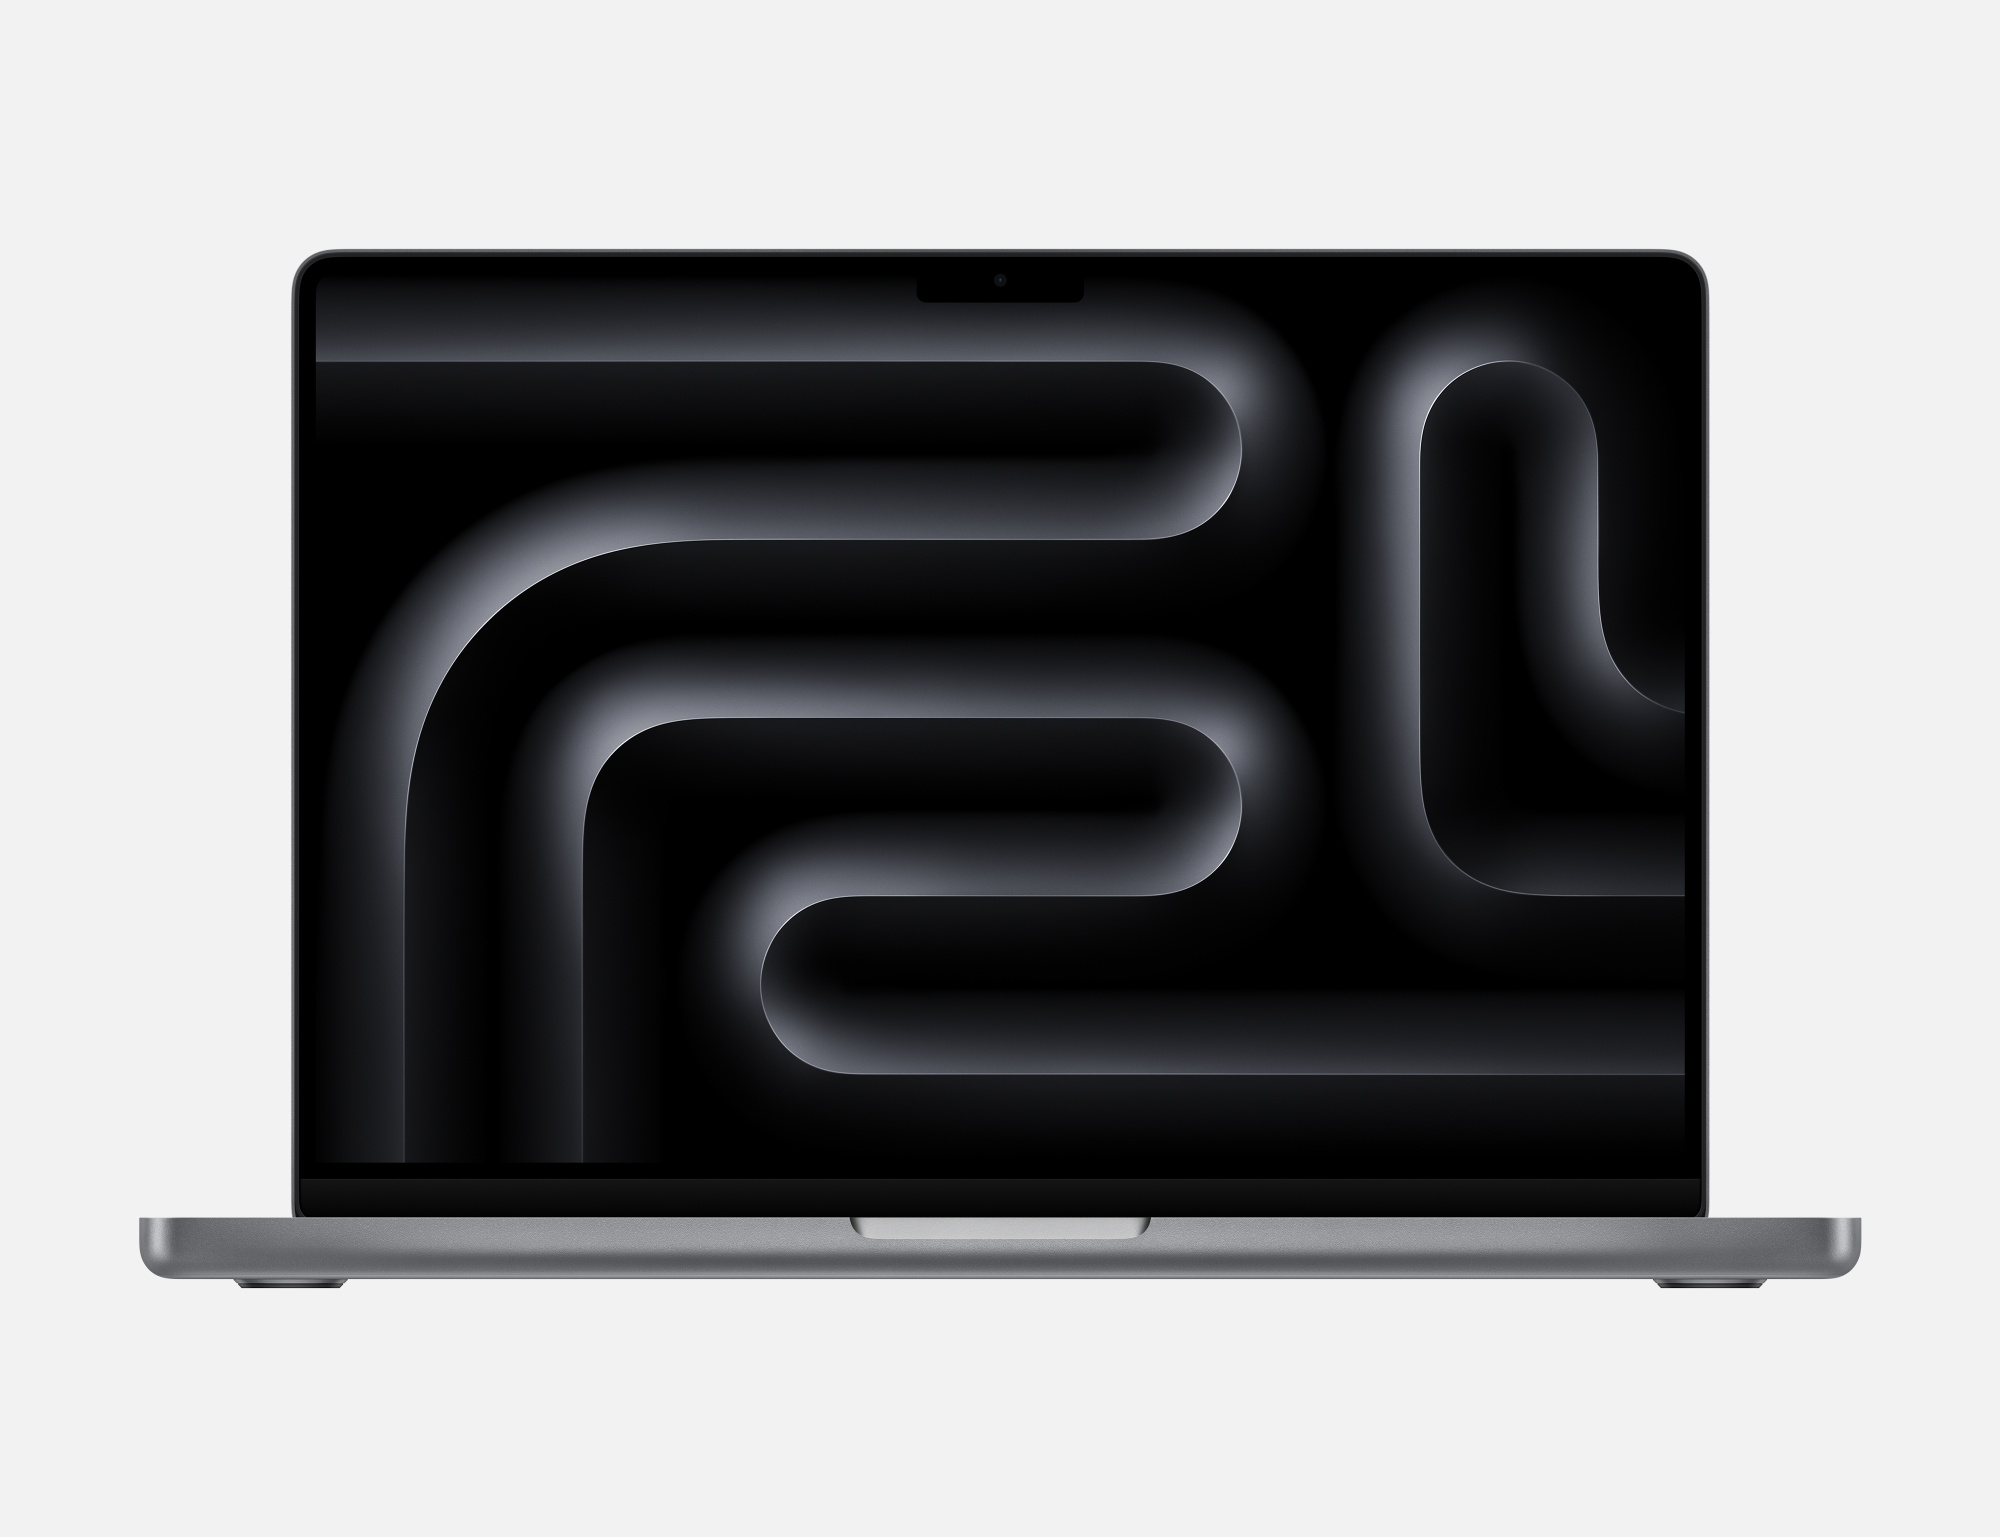 mbp14-spacegray-gallery1-202310